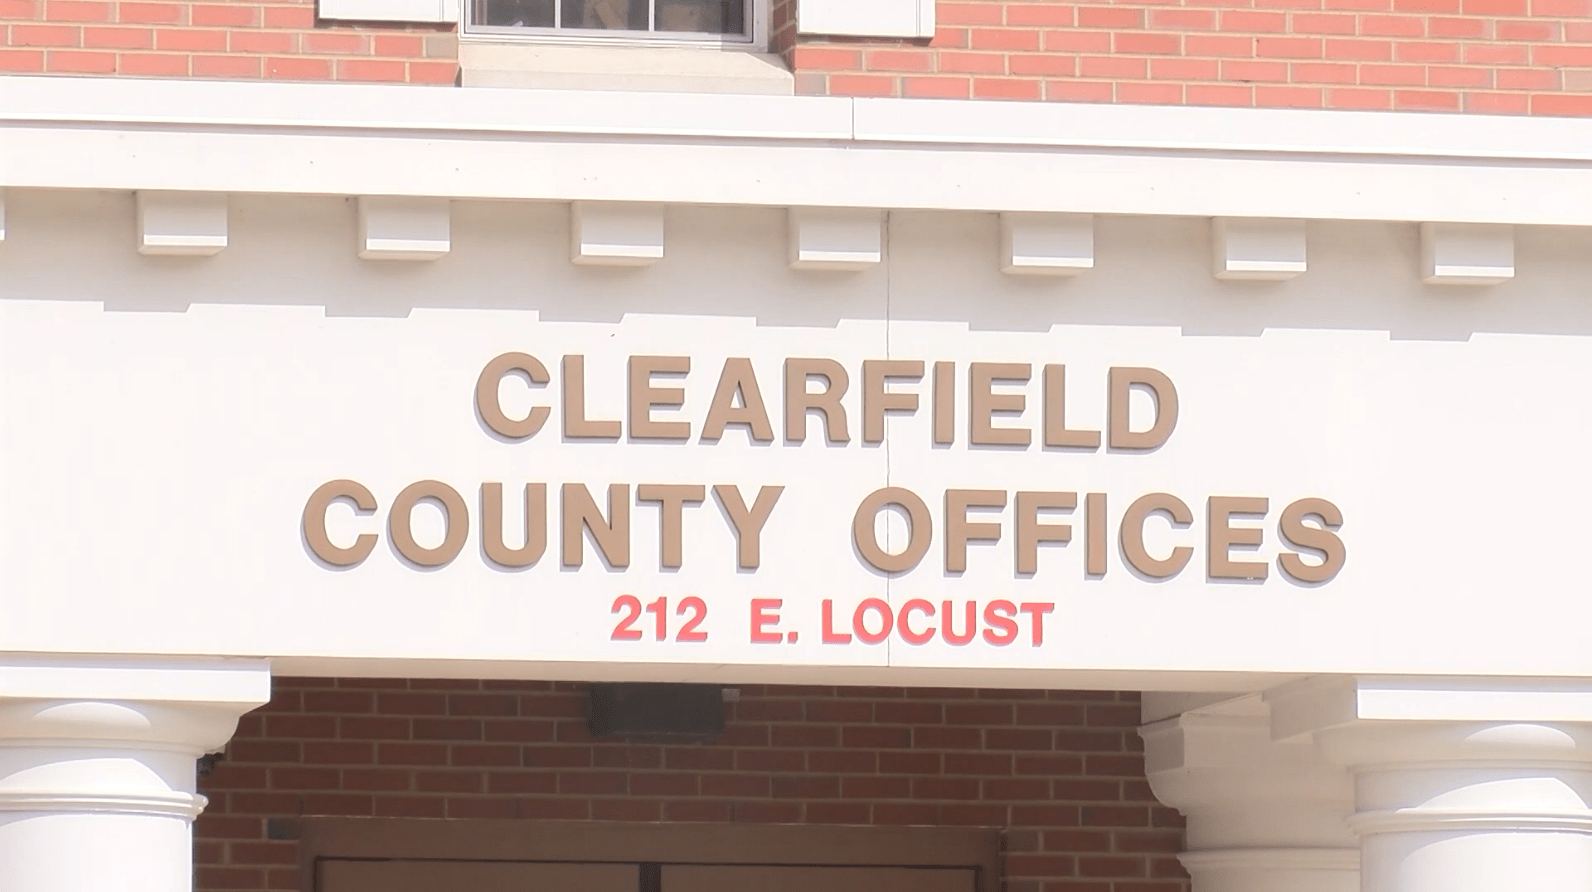 Image of Clearfield County Sheriff's Office